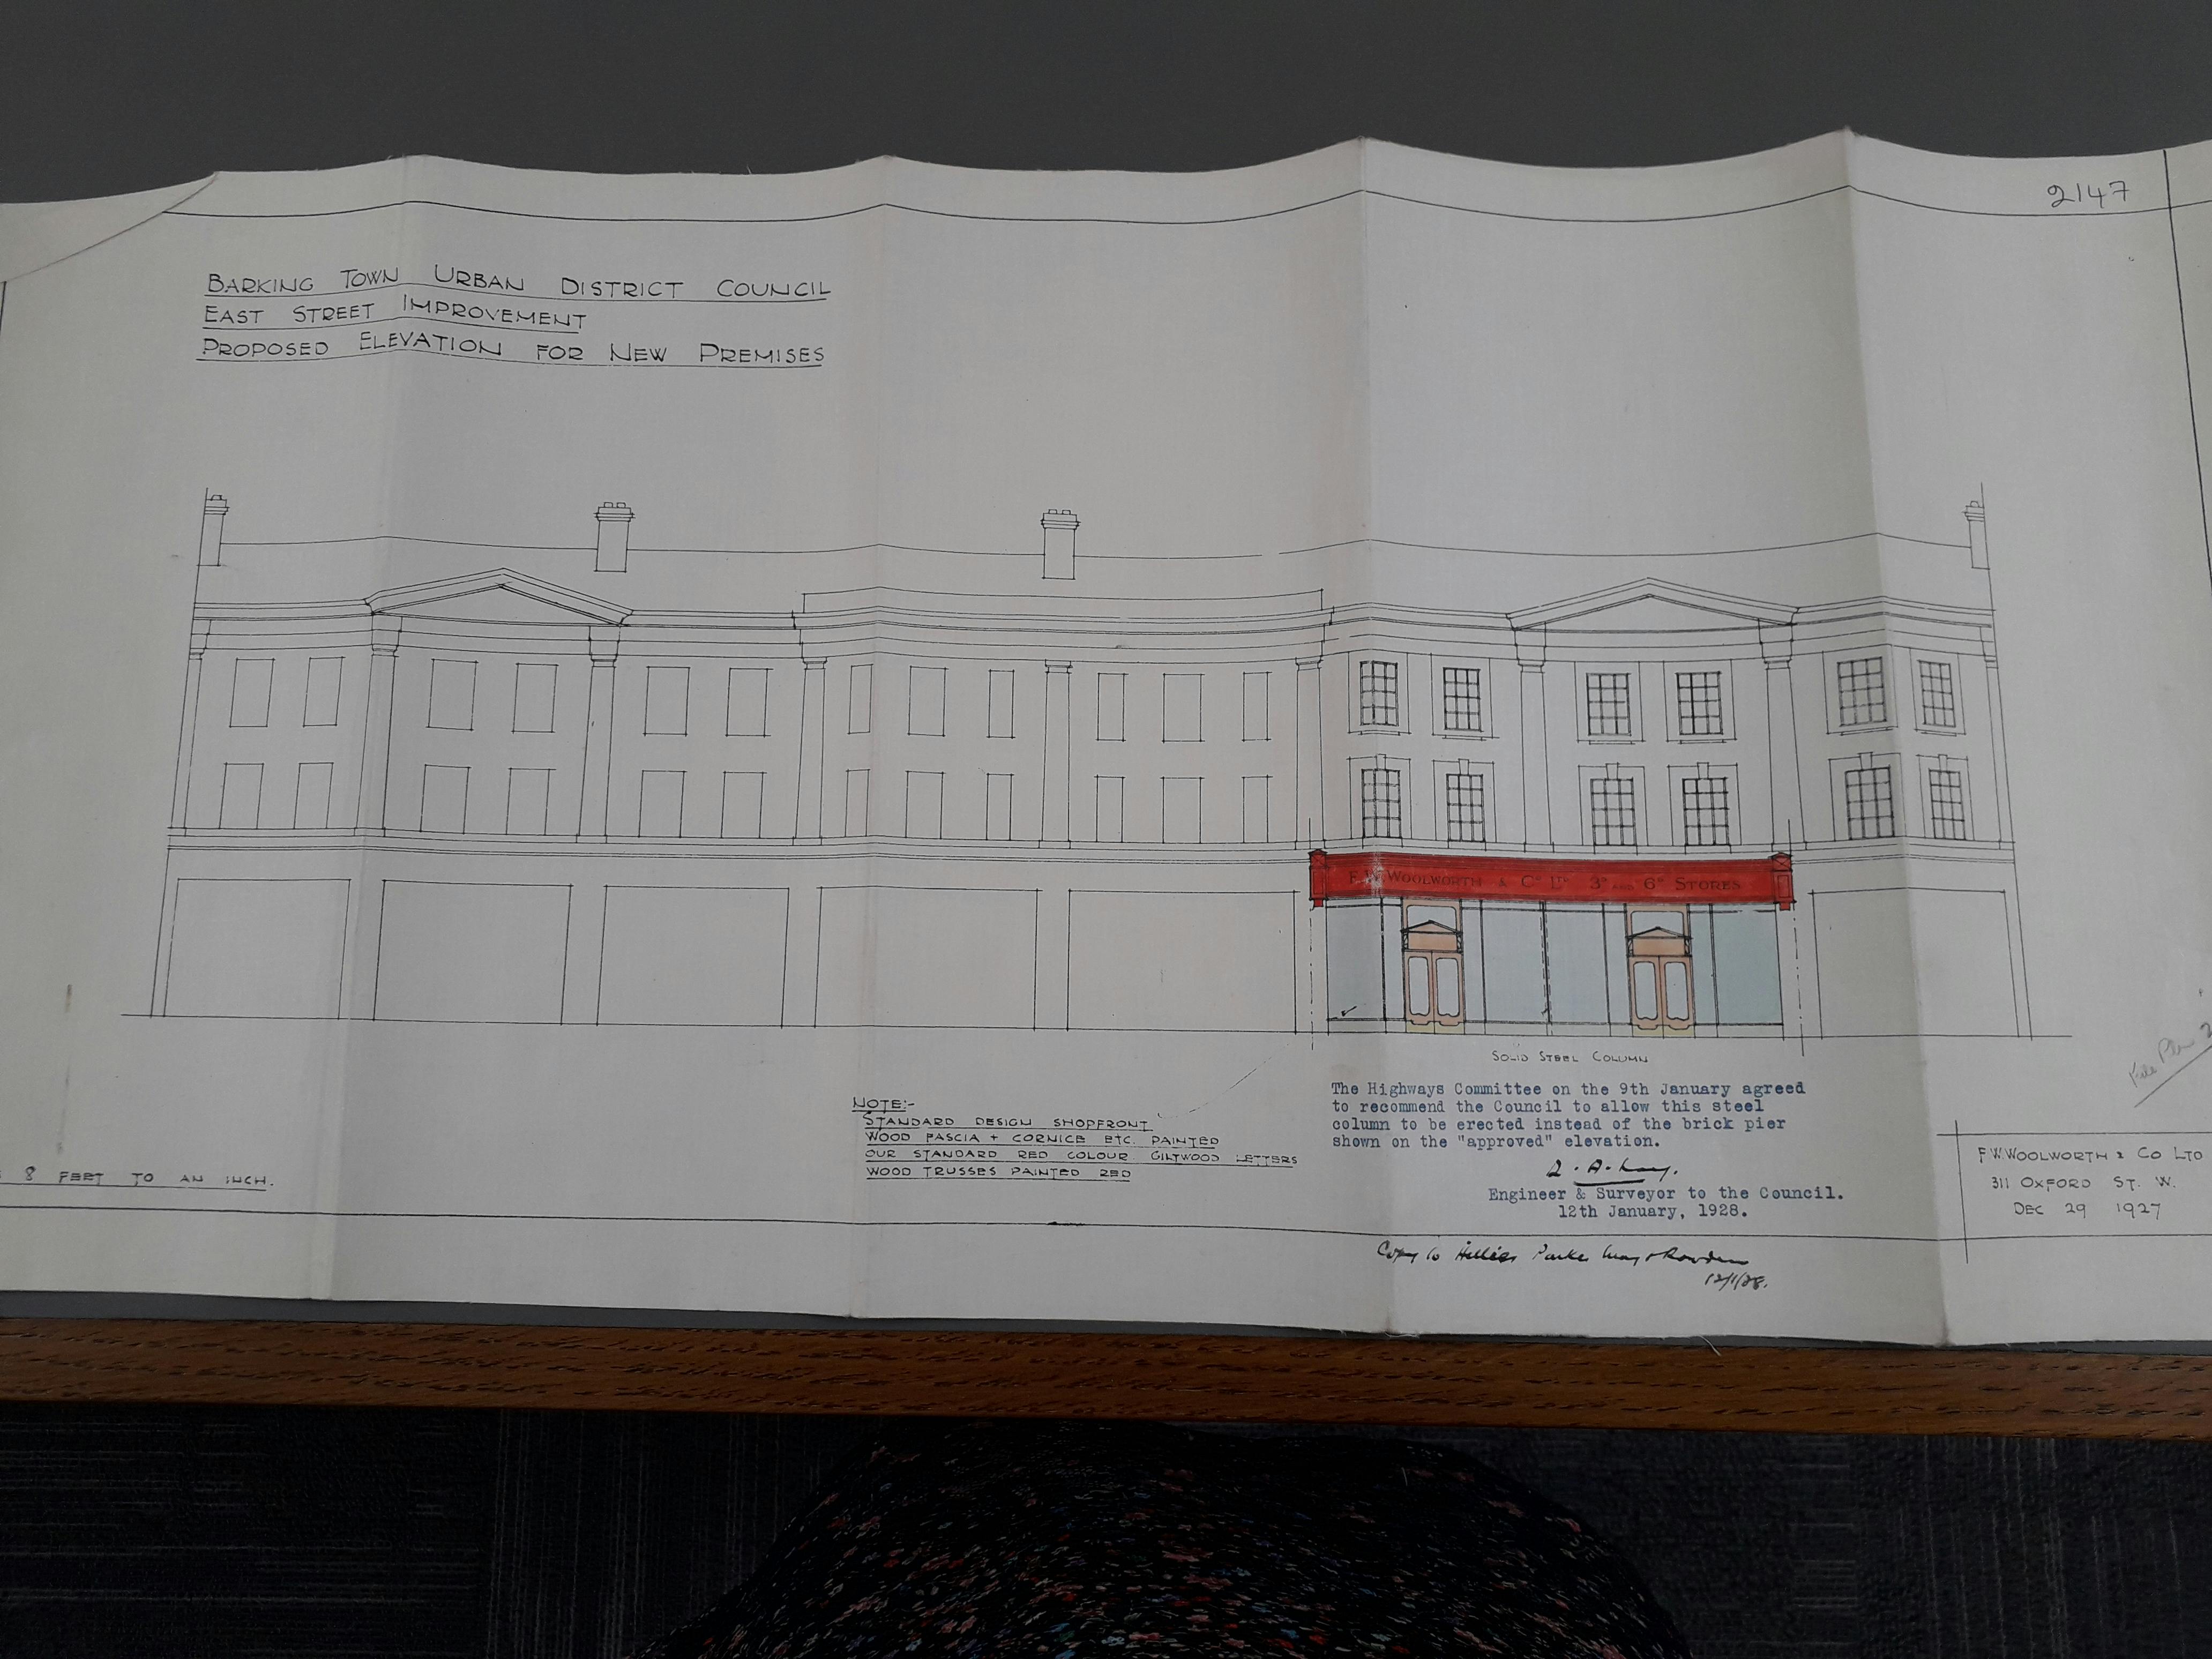 Woolworths Row 13-27 East Street Building Plans from 1927-8